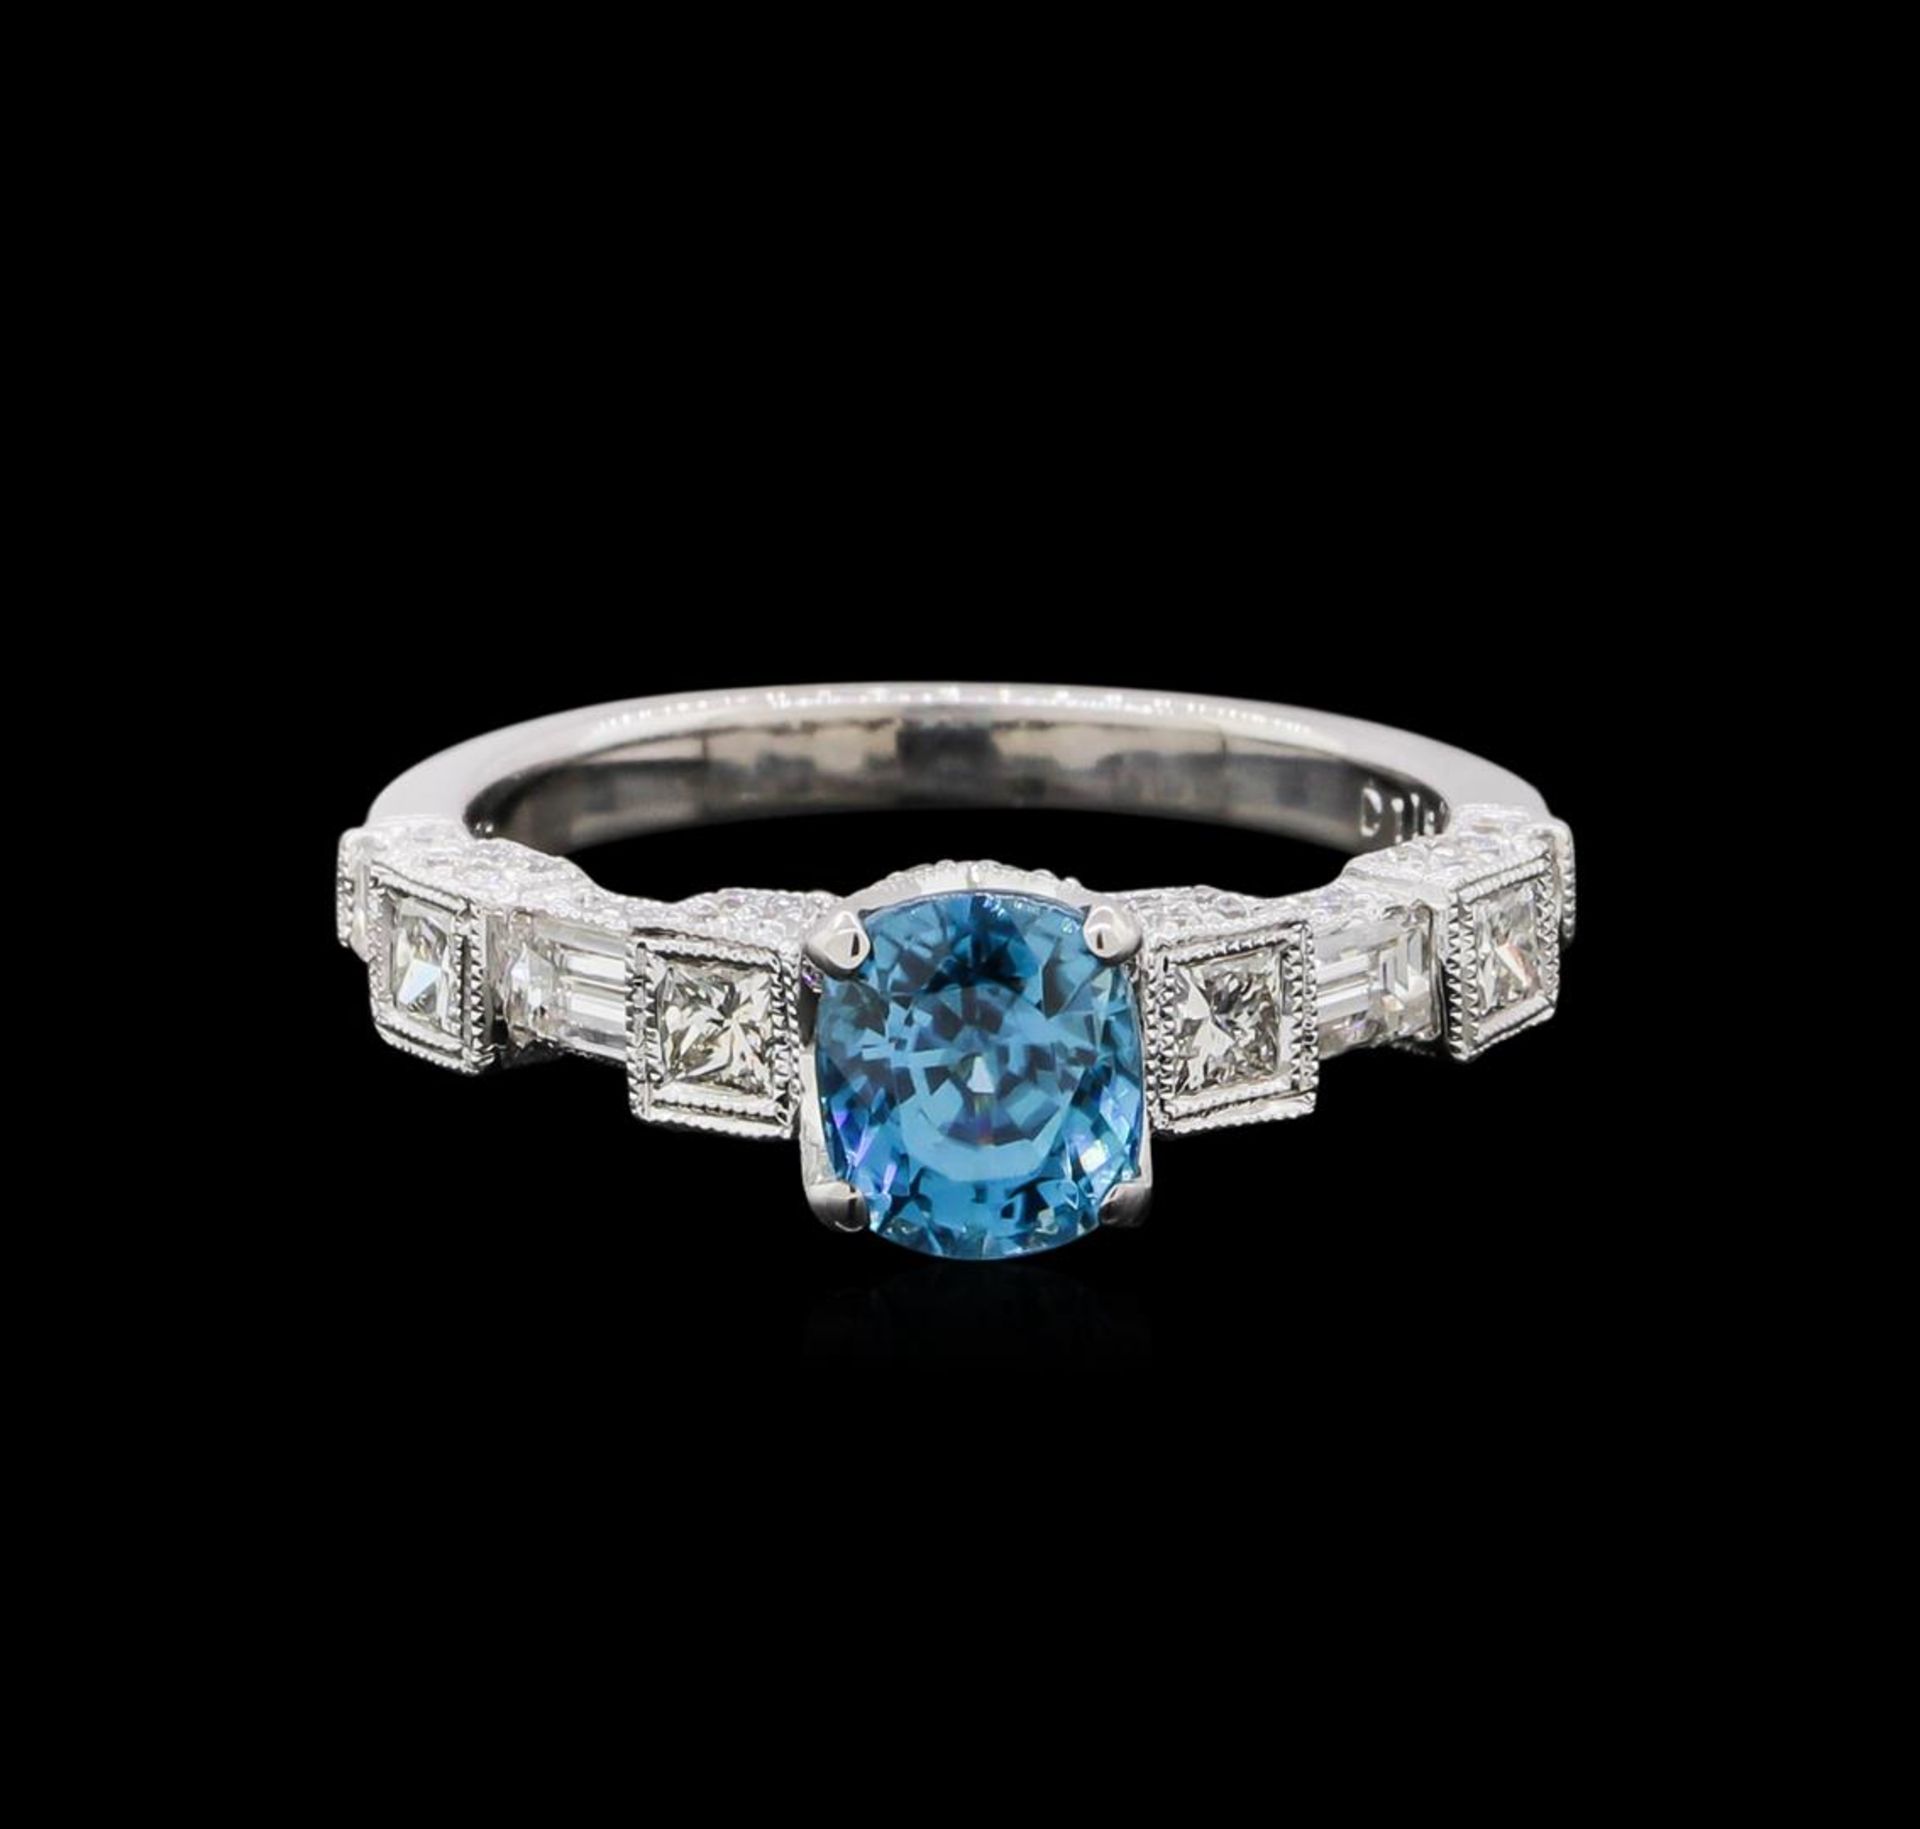 1.92 ctw Blue Zircon and Diamond Ring - 18KT White Gold - Image 2 of 5